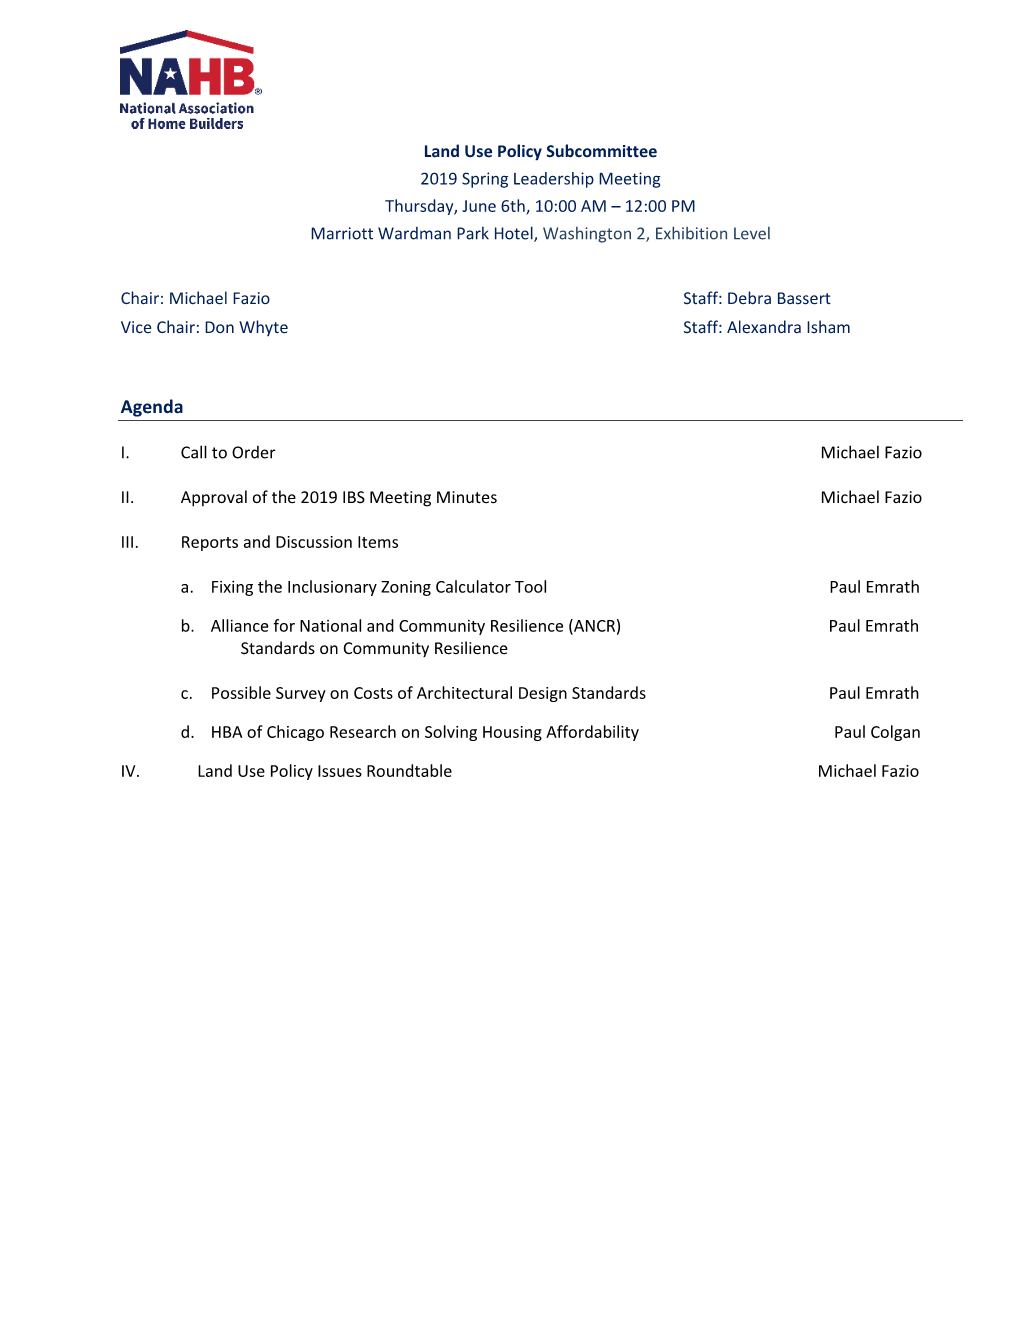 2019 Spring Leadership Land Use Policy Subcommittee Packet